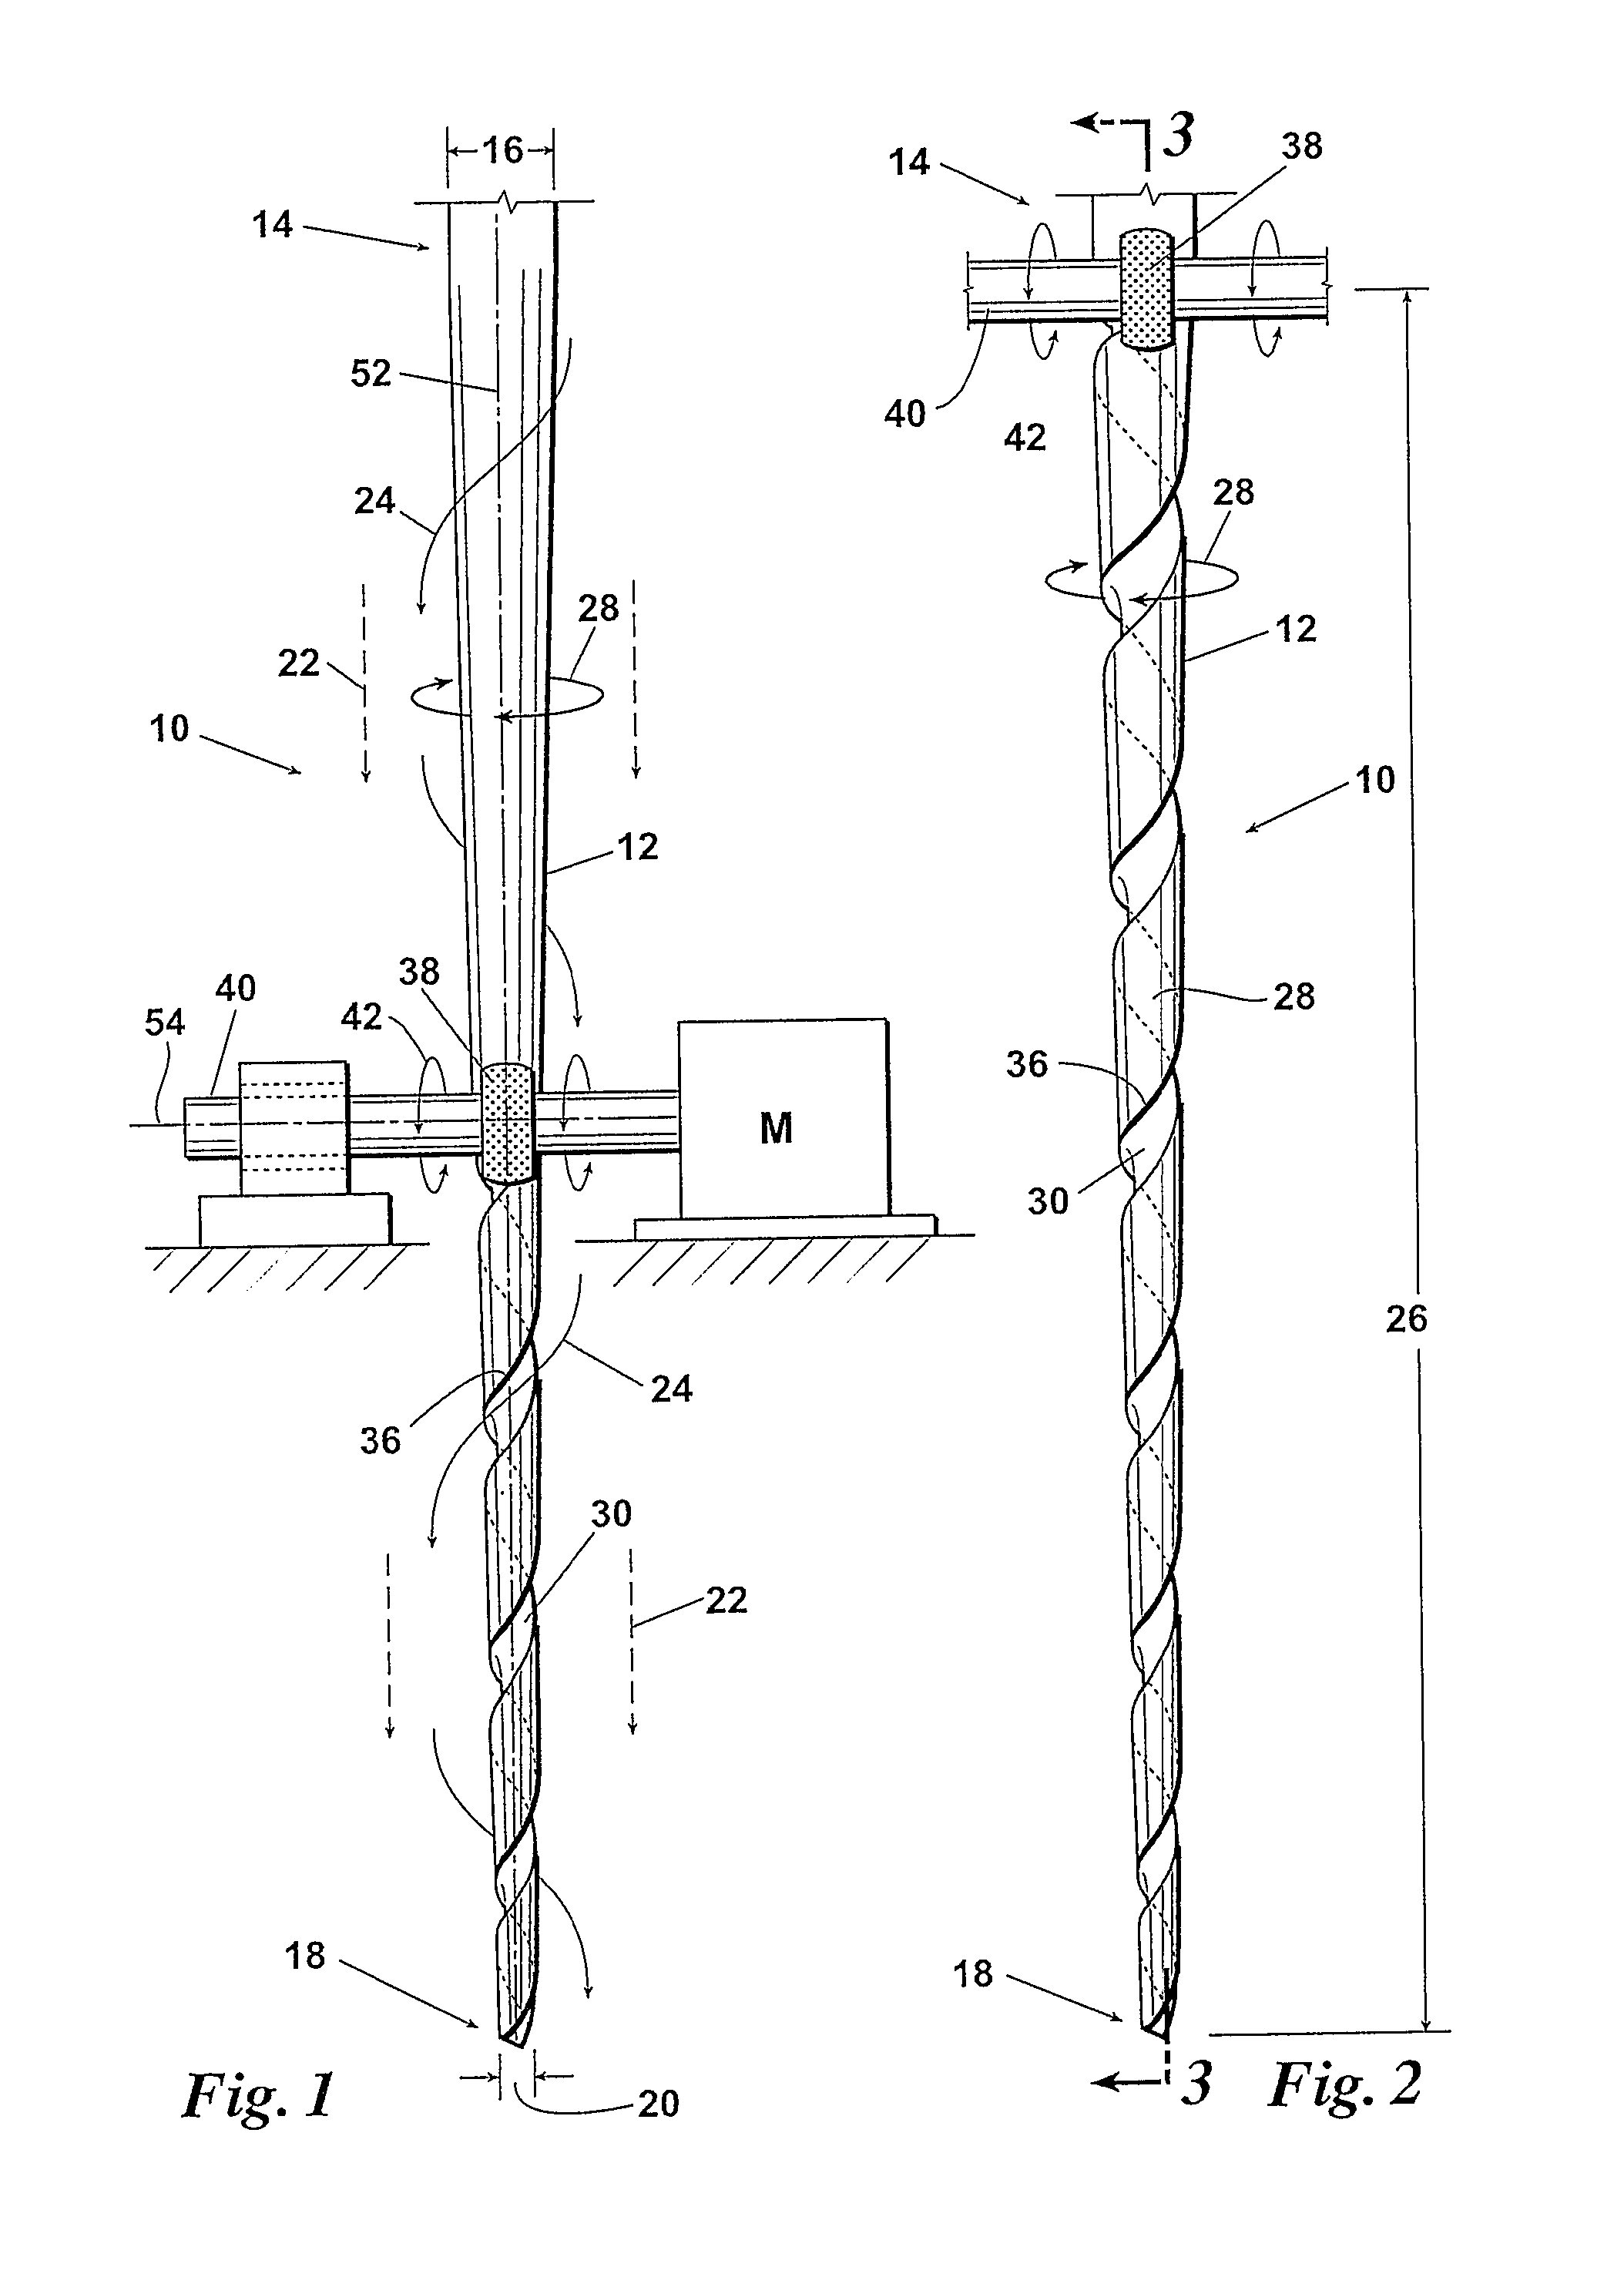 Longitudinally Ground File Having Increased Resistance to Torsional and Cyclic Fatigue Failure